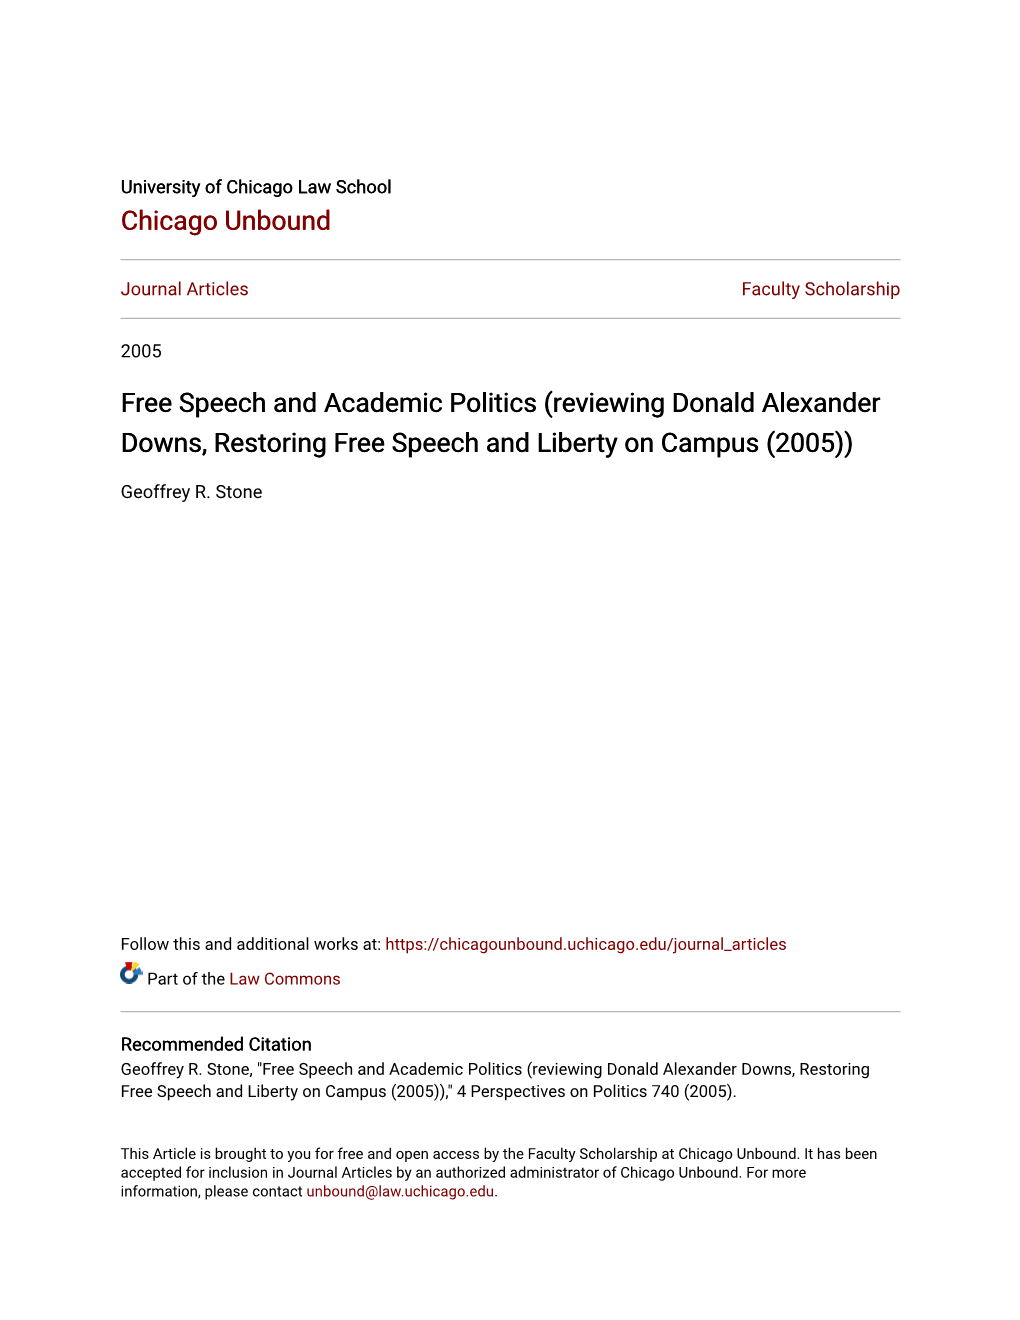 Free Speech and Academic Politics (Reviewing Donald Alexander Downs, Restoring Free Speech and Liberty on Campus (2005))